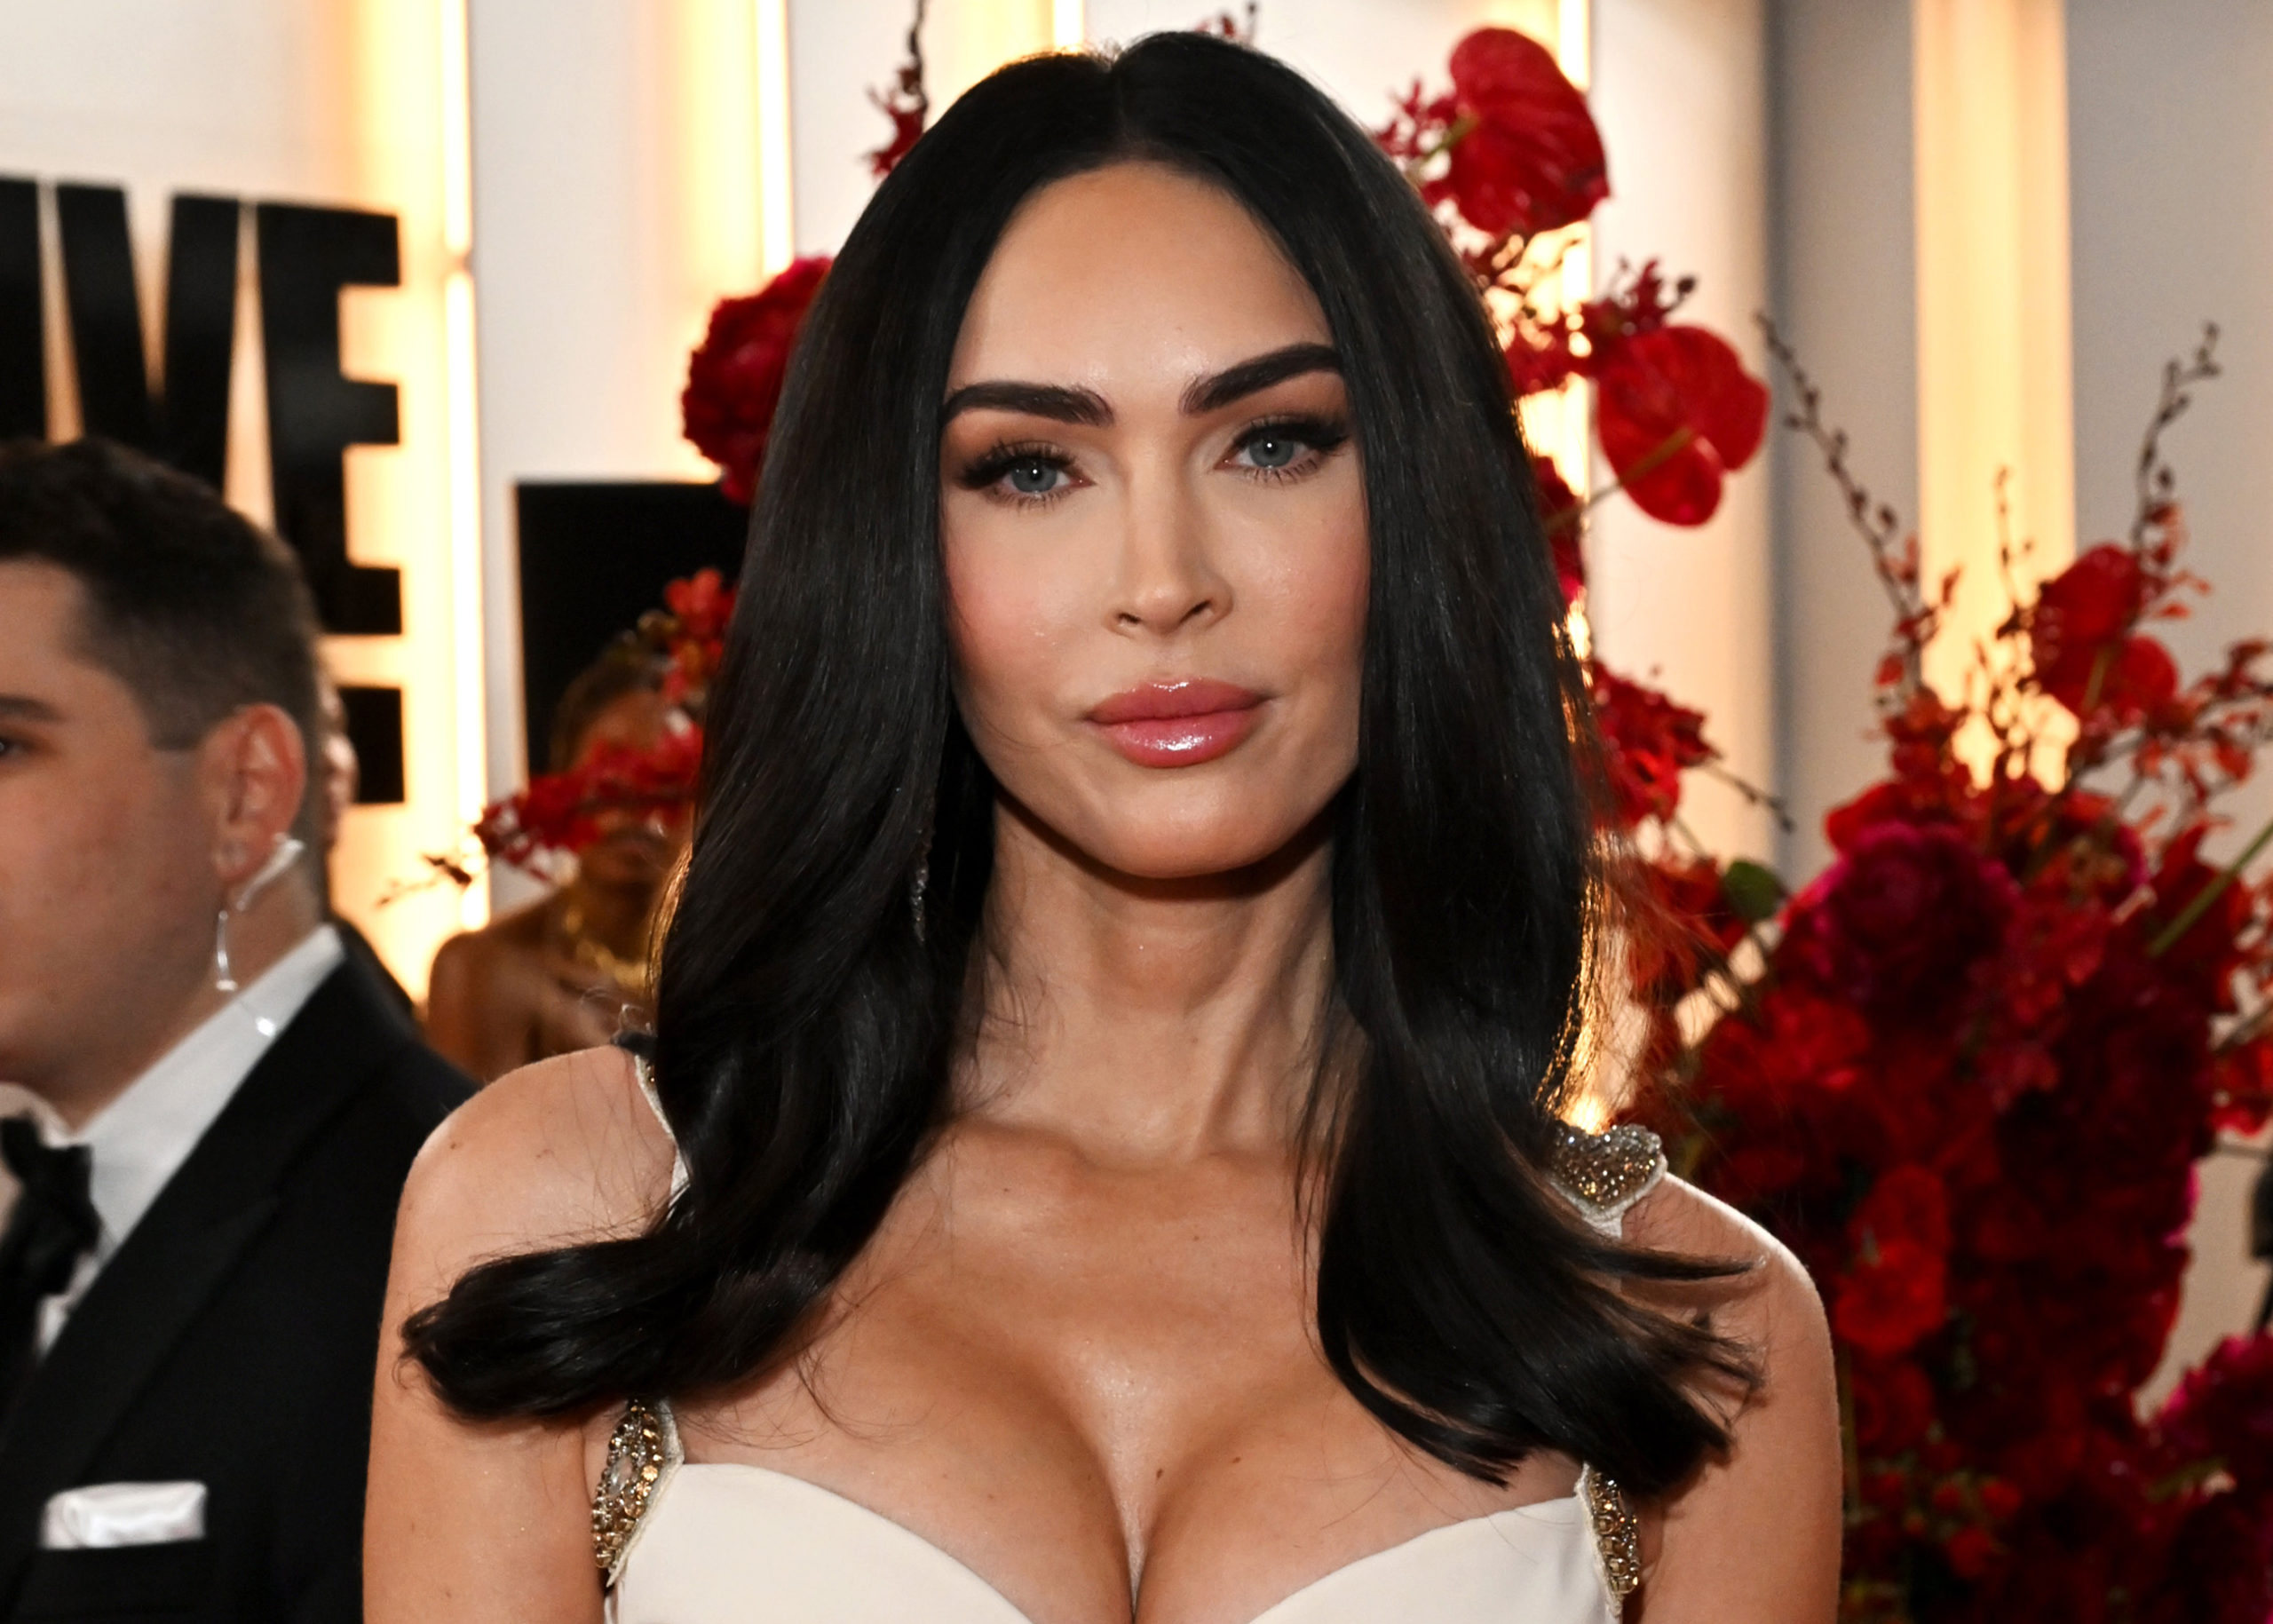 The Lifting and Tightening Gel Megan Fox Used Before the
Grammys